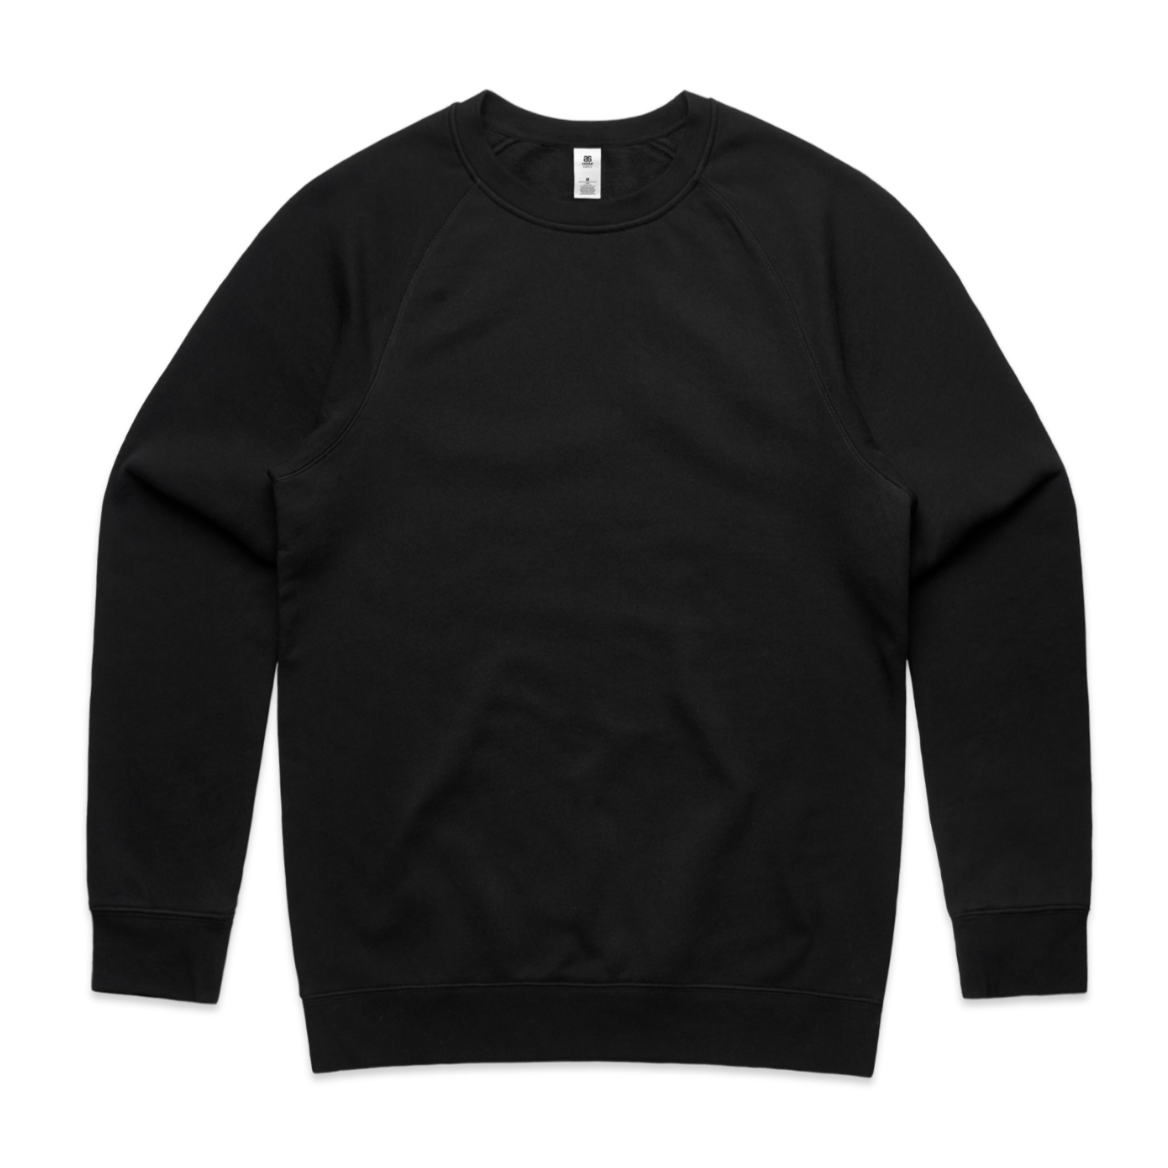 Line Drawing Embroidered Adult Unisex Crewneck